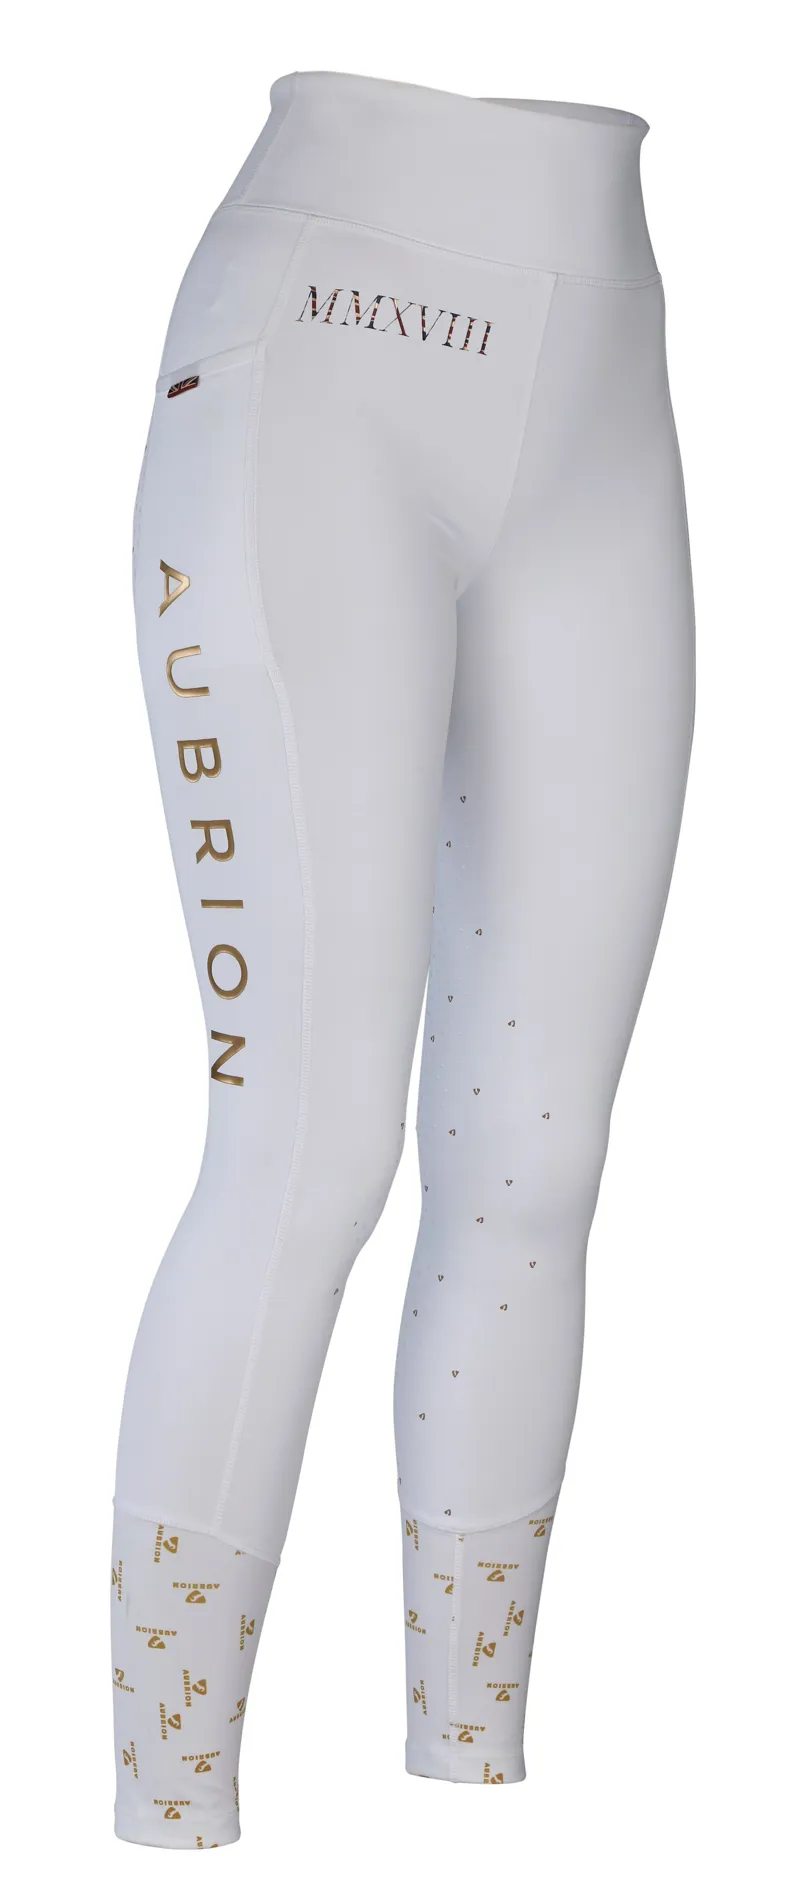 Shires Aubrion Team Riding Tights Ladies in White